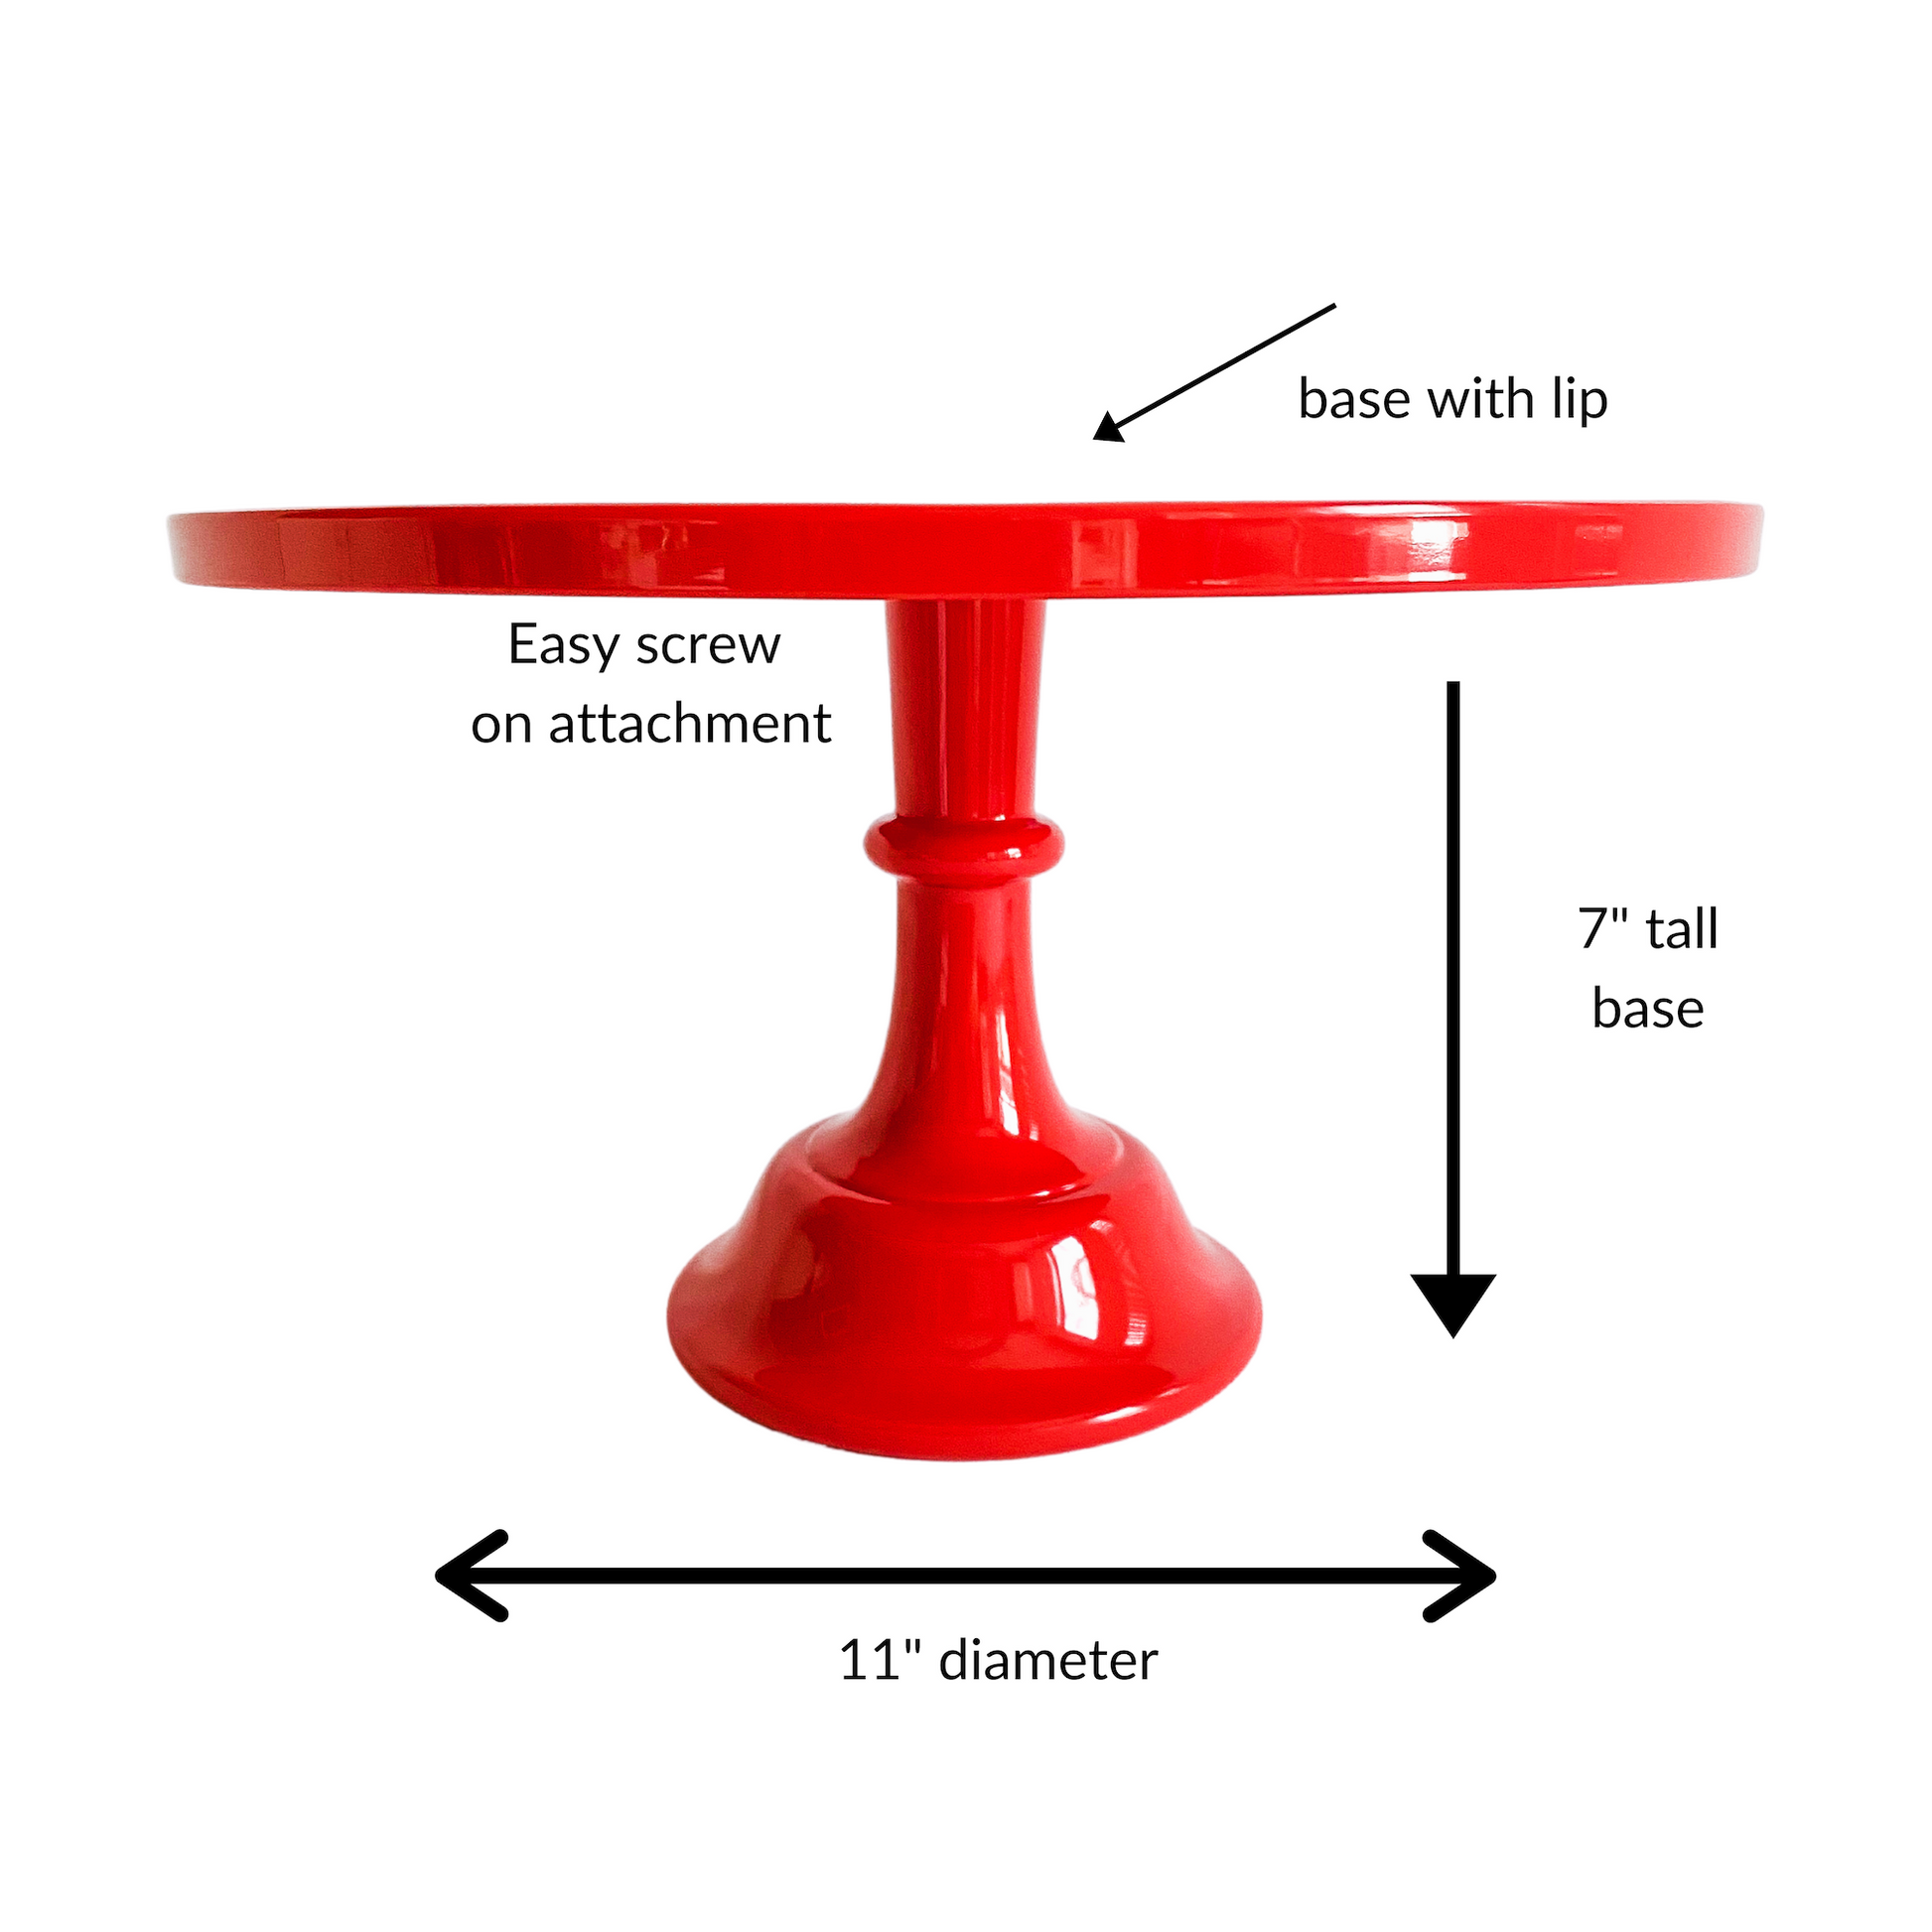 red cake stand